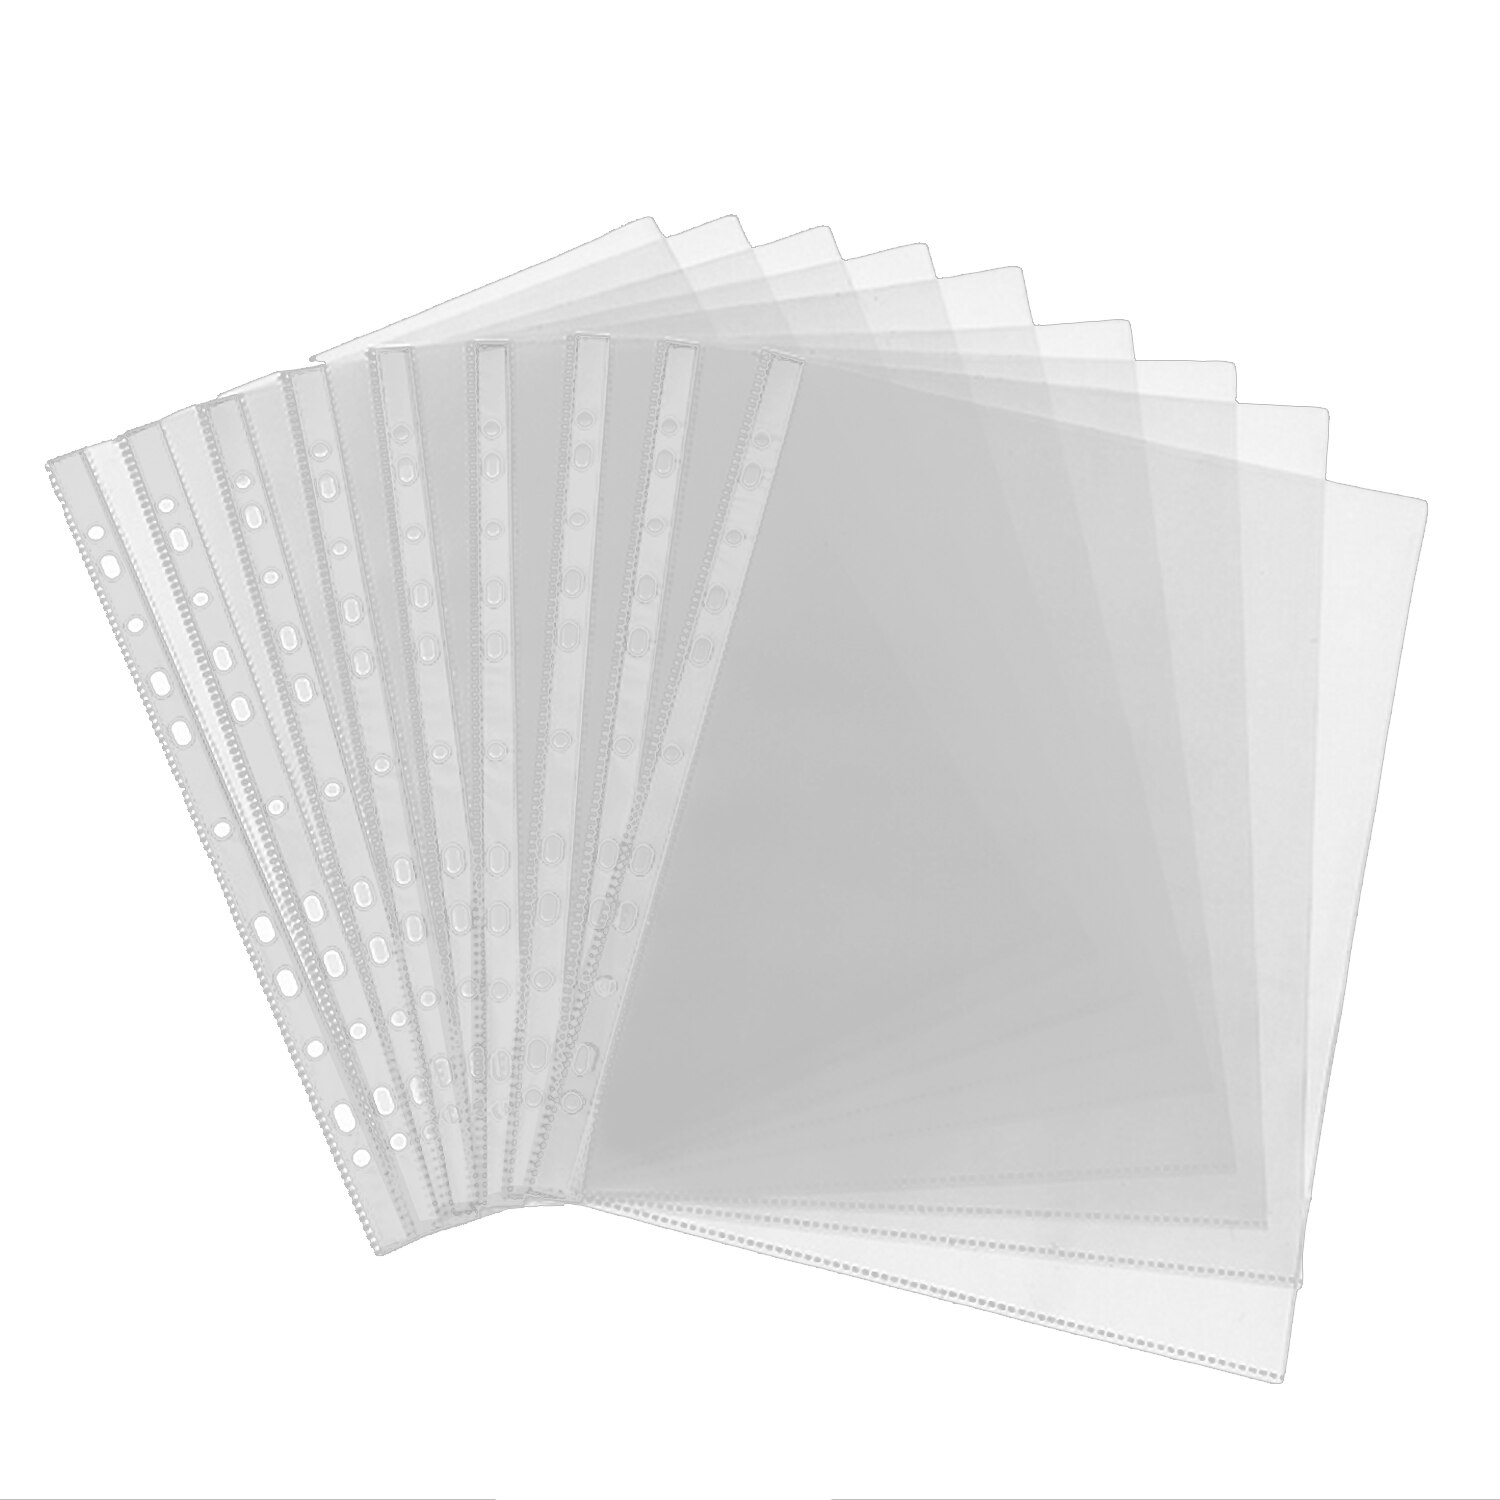 20PCS A4 Size Multipurpose 11-Hole Loose Leaf Clear PVC Sheet Page Protectors for Documents Files Paper